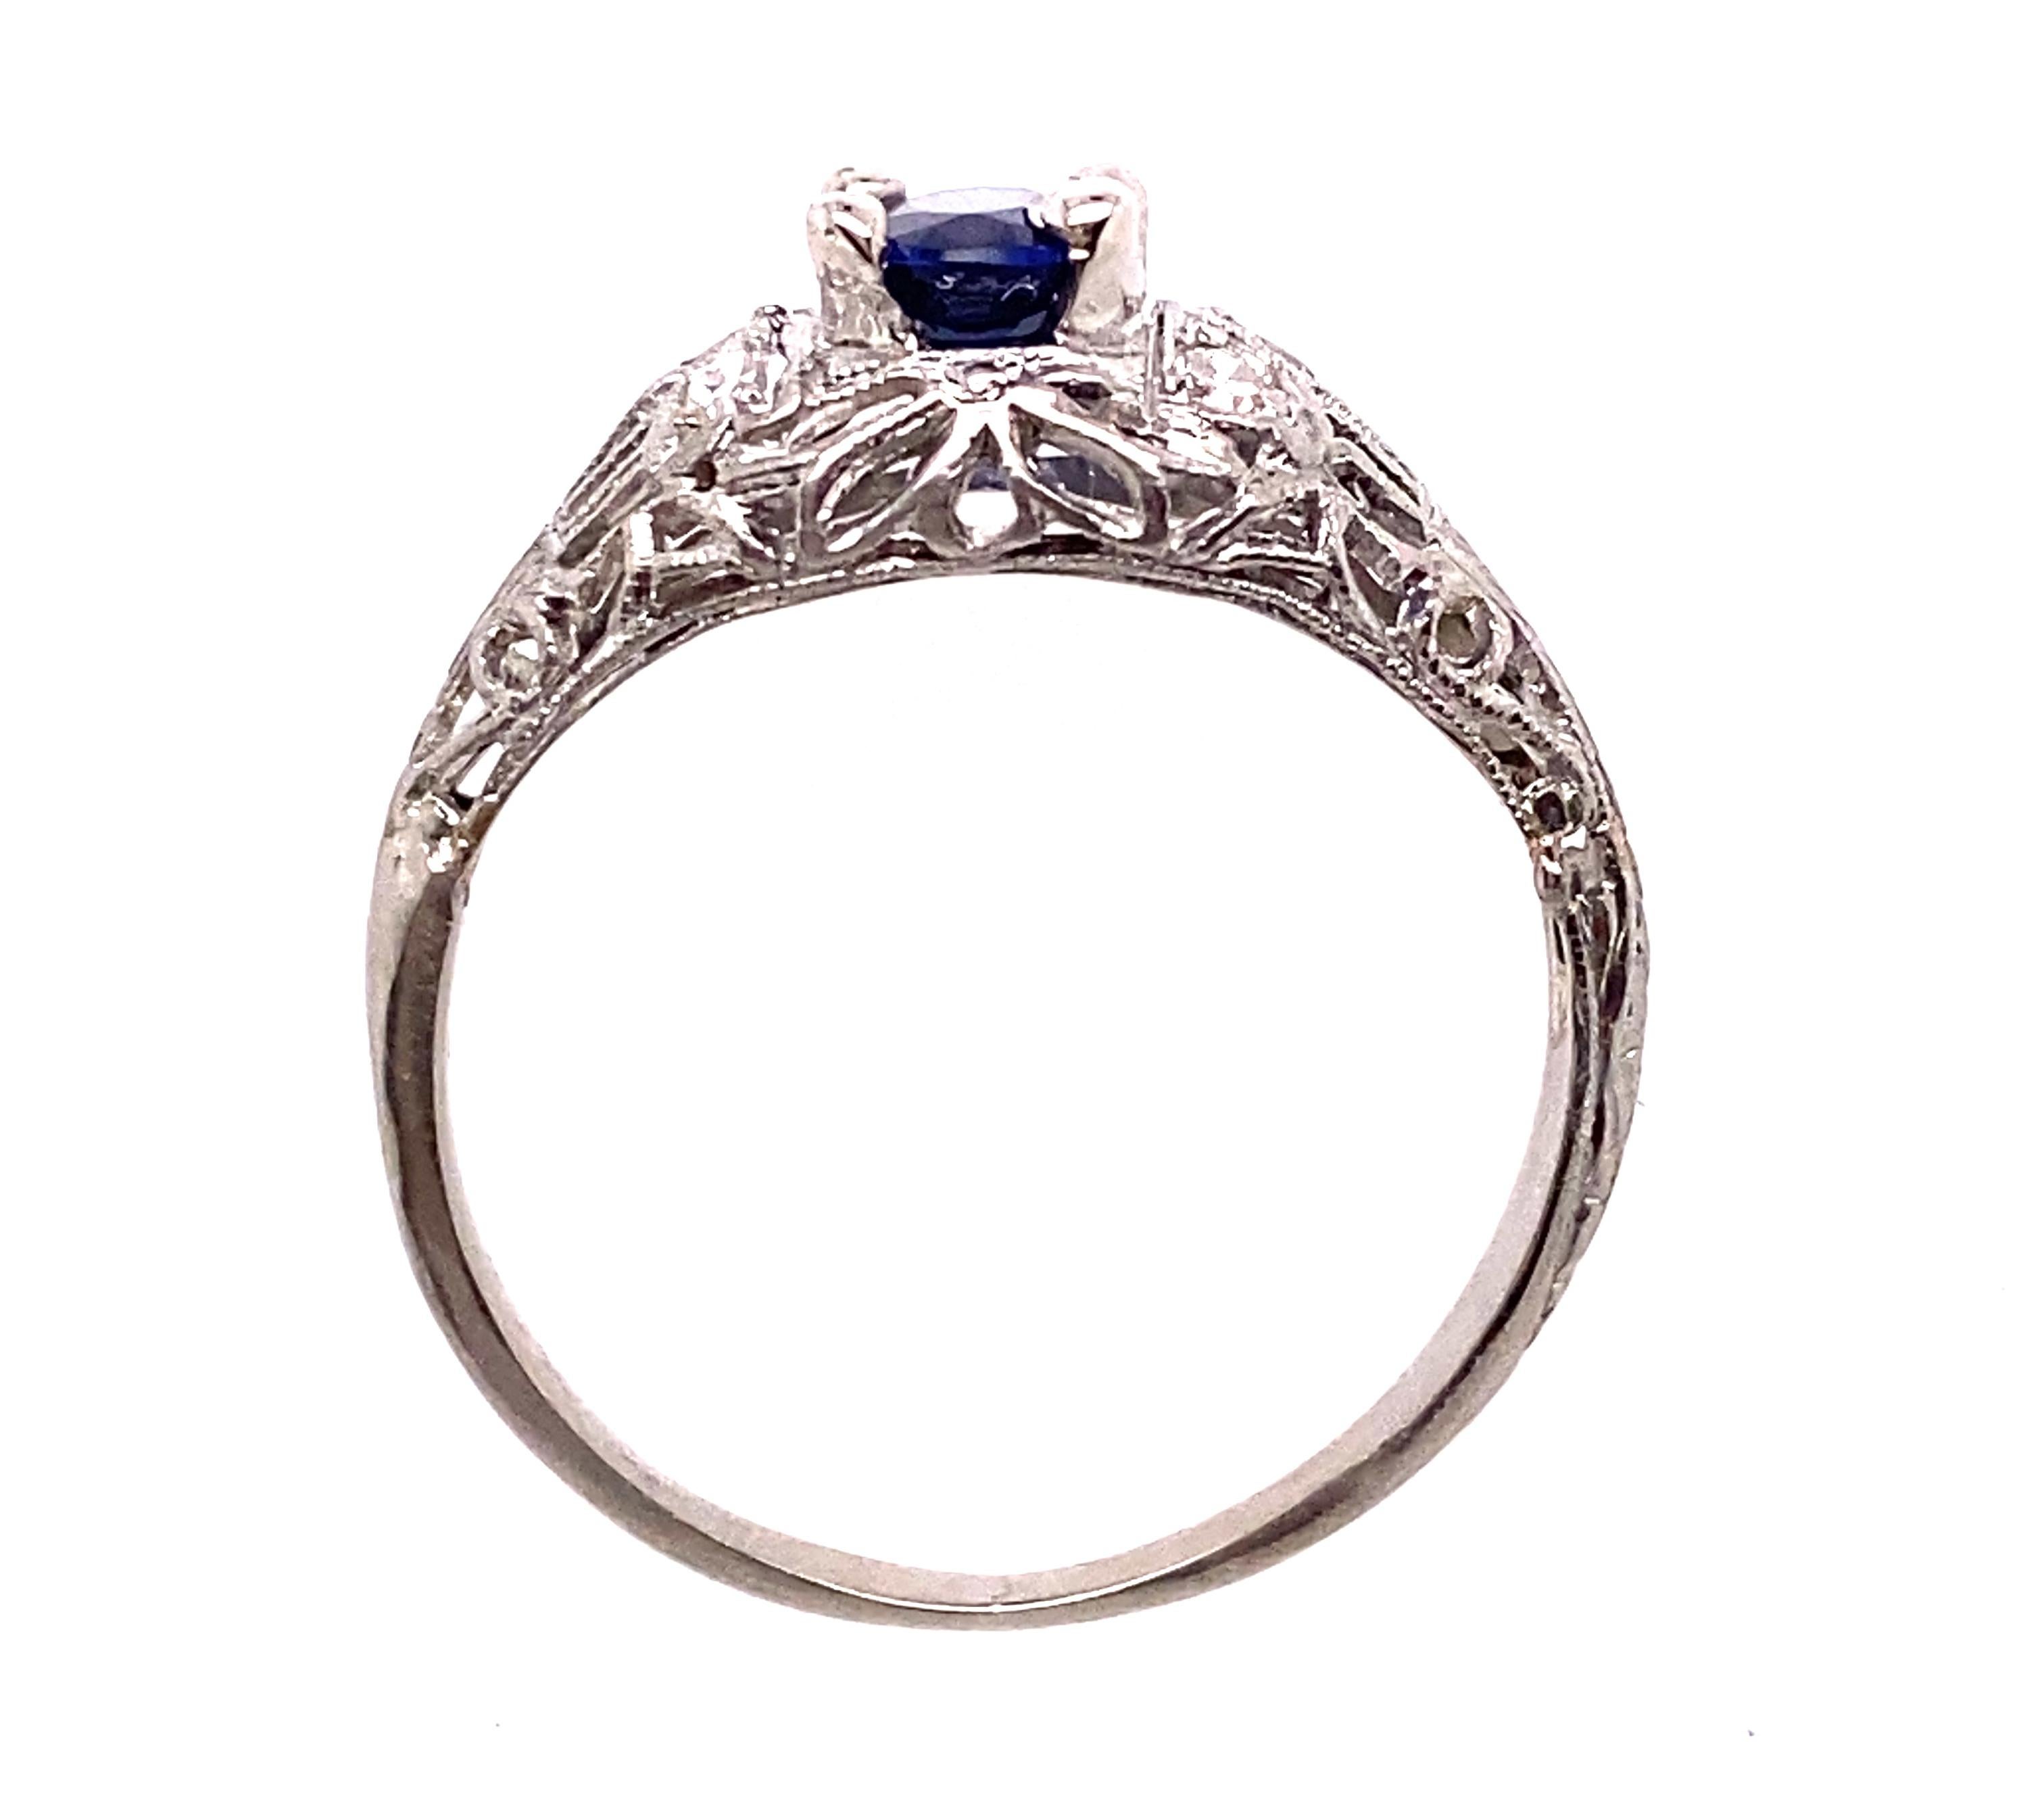 Genuine Original Antique Art Deco from 1920's-1930's Vintage Sapphire Diamond Engagement Ring .82ct Platinum


Featuring a Gorgeous .72ct Genuine Natural Oval Blue Sapphire Center

Incredible Hand Carved Filigree

Stunning Antique Ring

Delicate